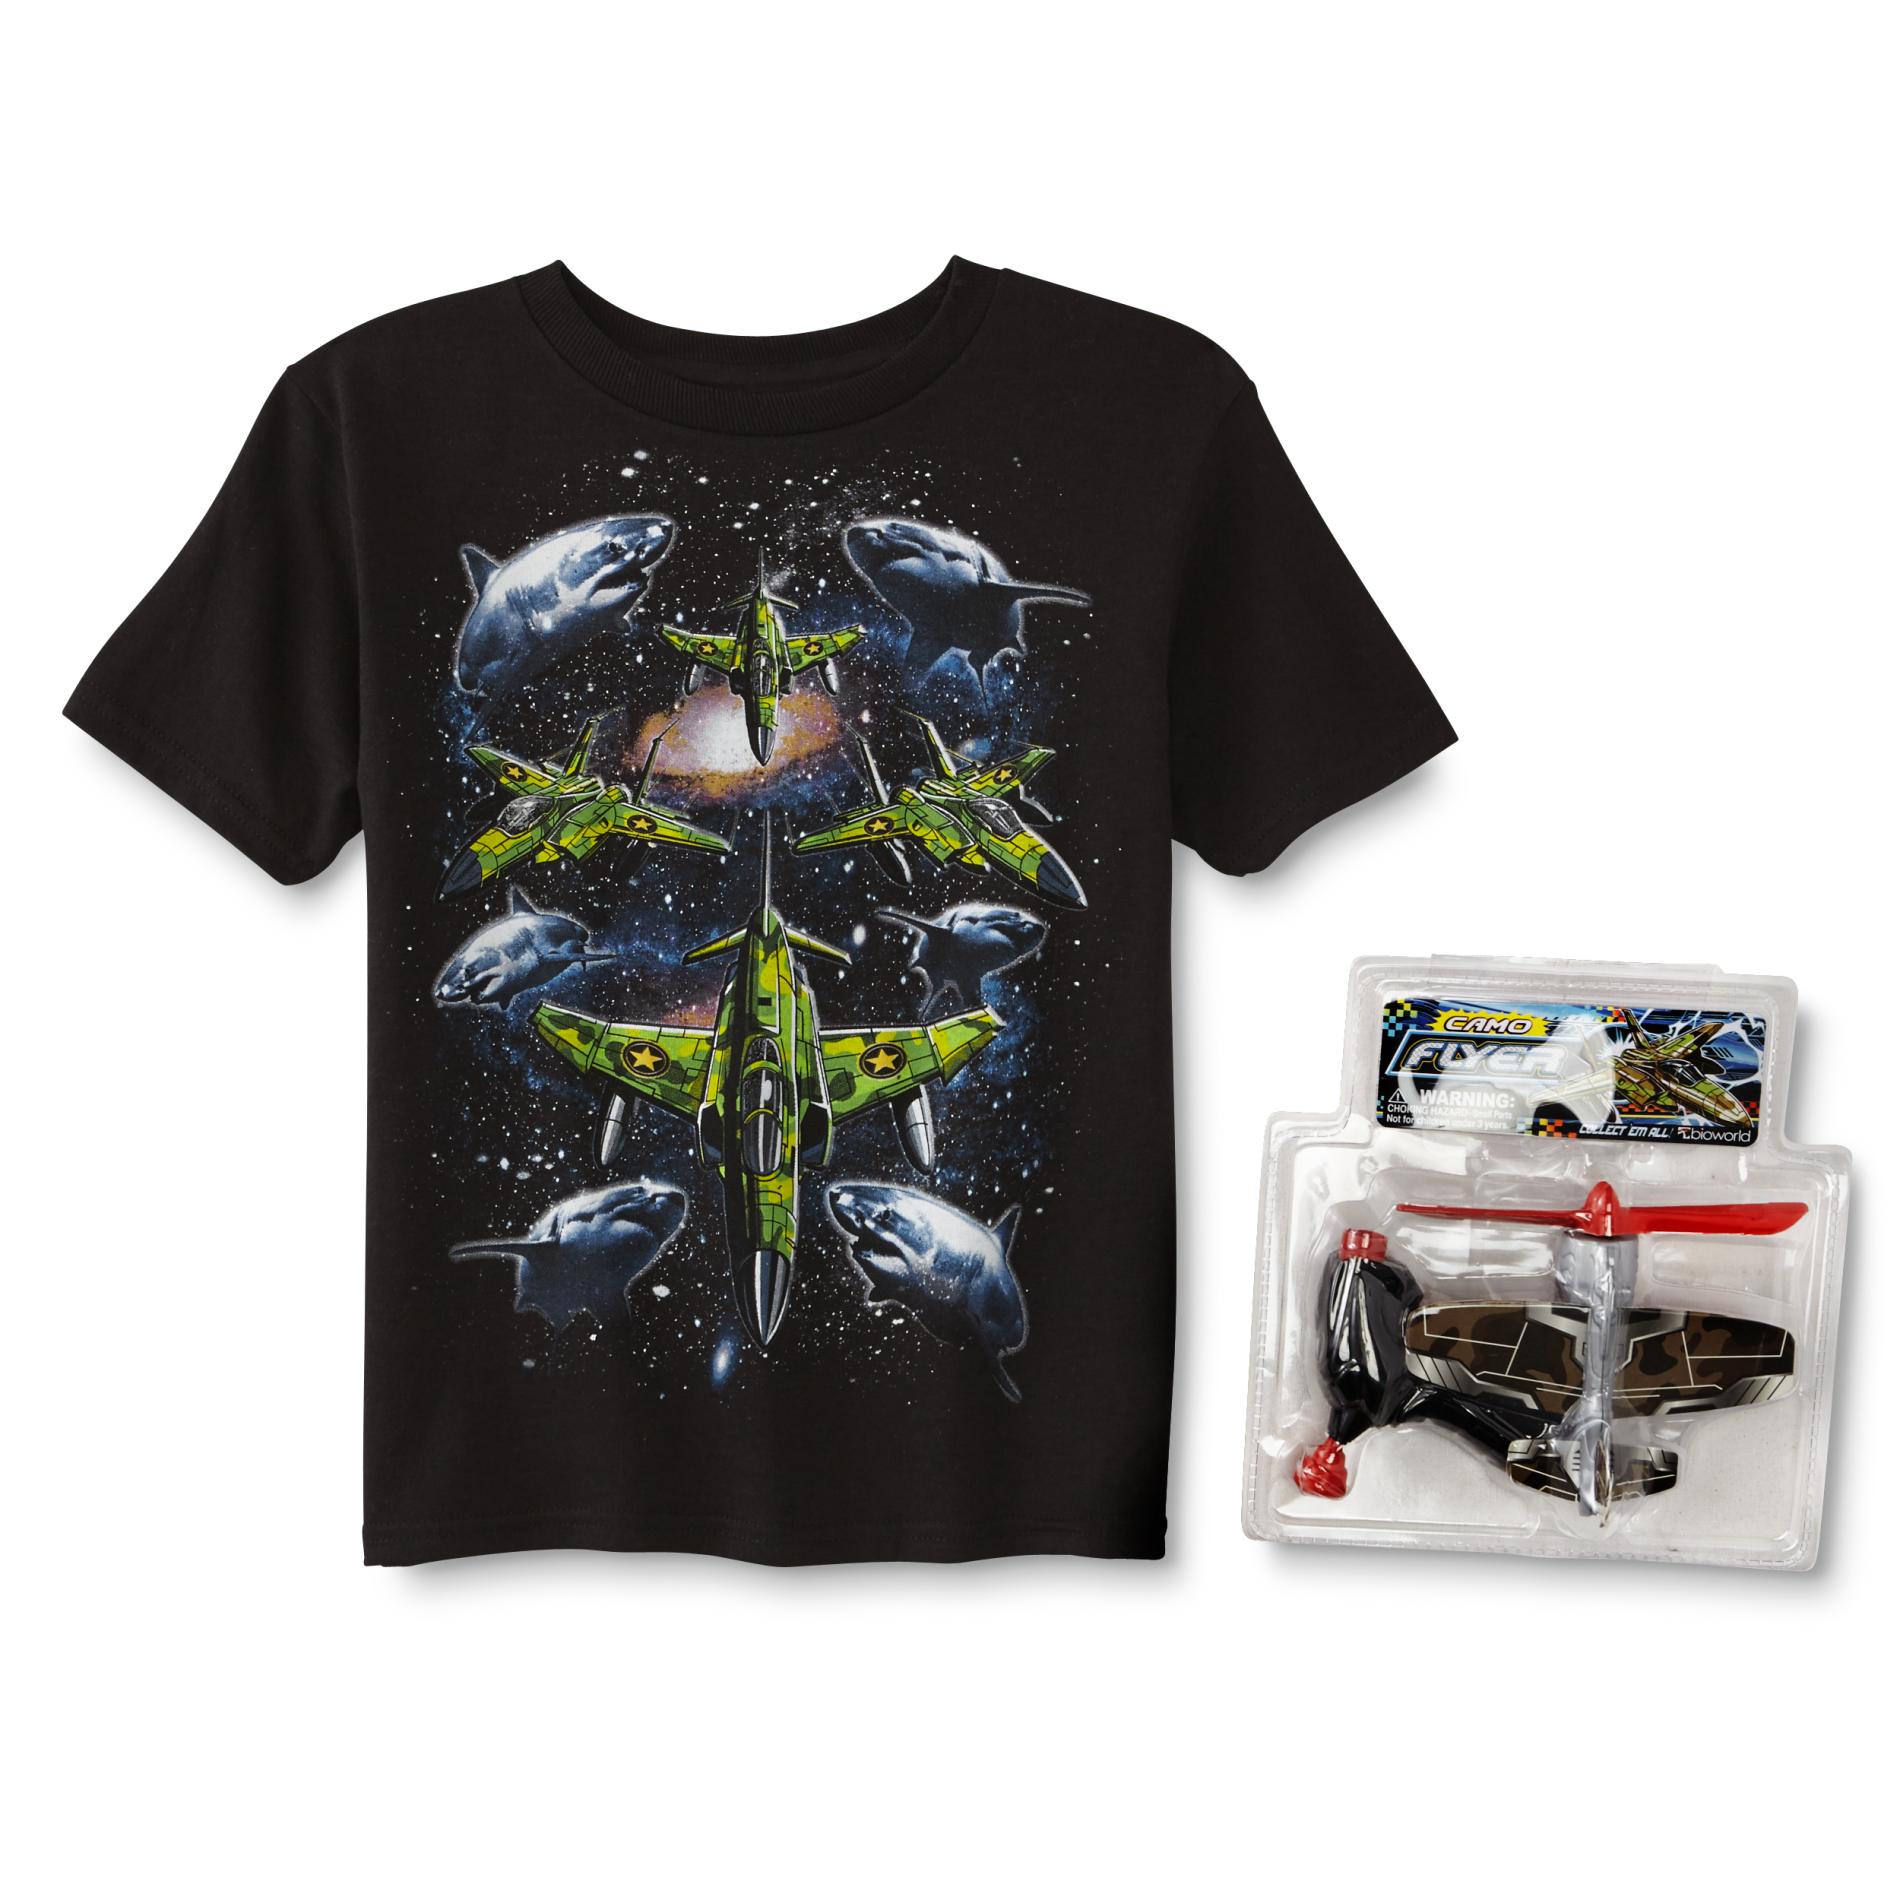 Boy's Graphic T-Shirt & Toy - Camo Flyer